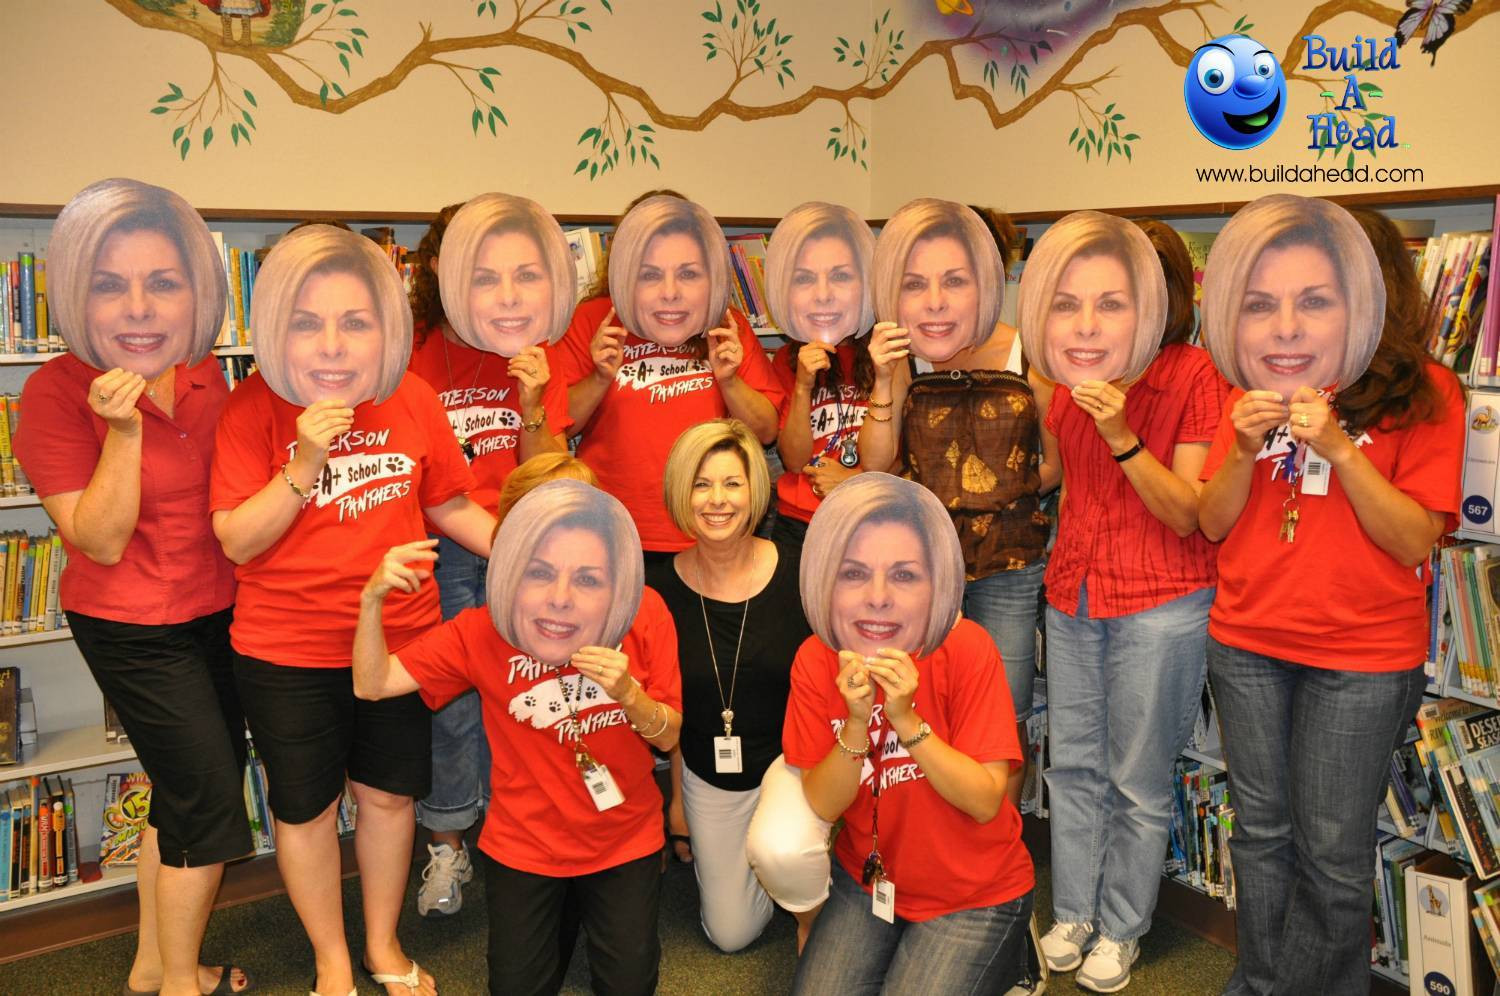 Fun Retirement Party Ideas
 Big heads are perfect decorations and party favors for